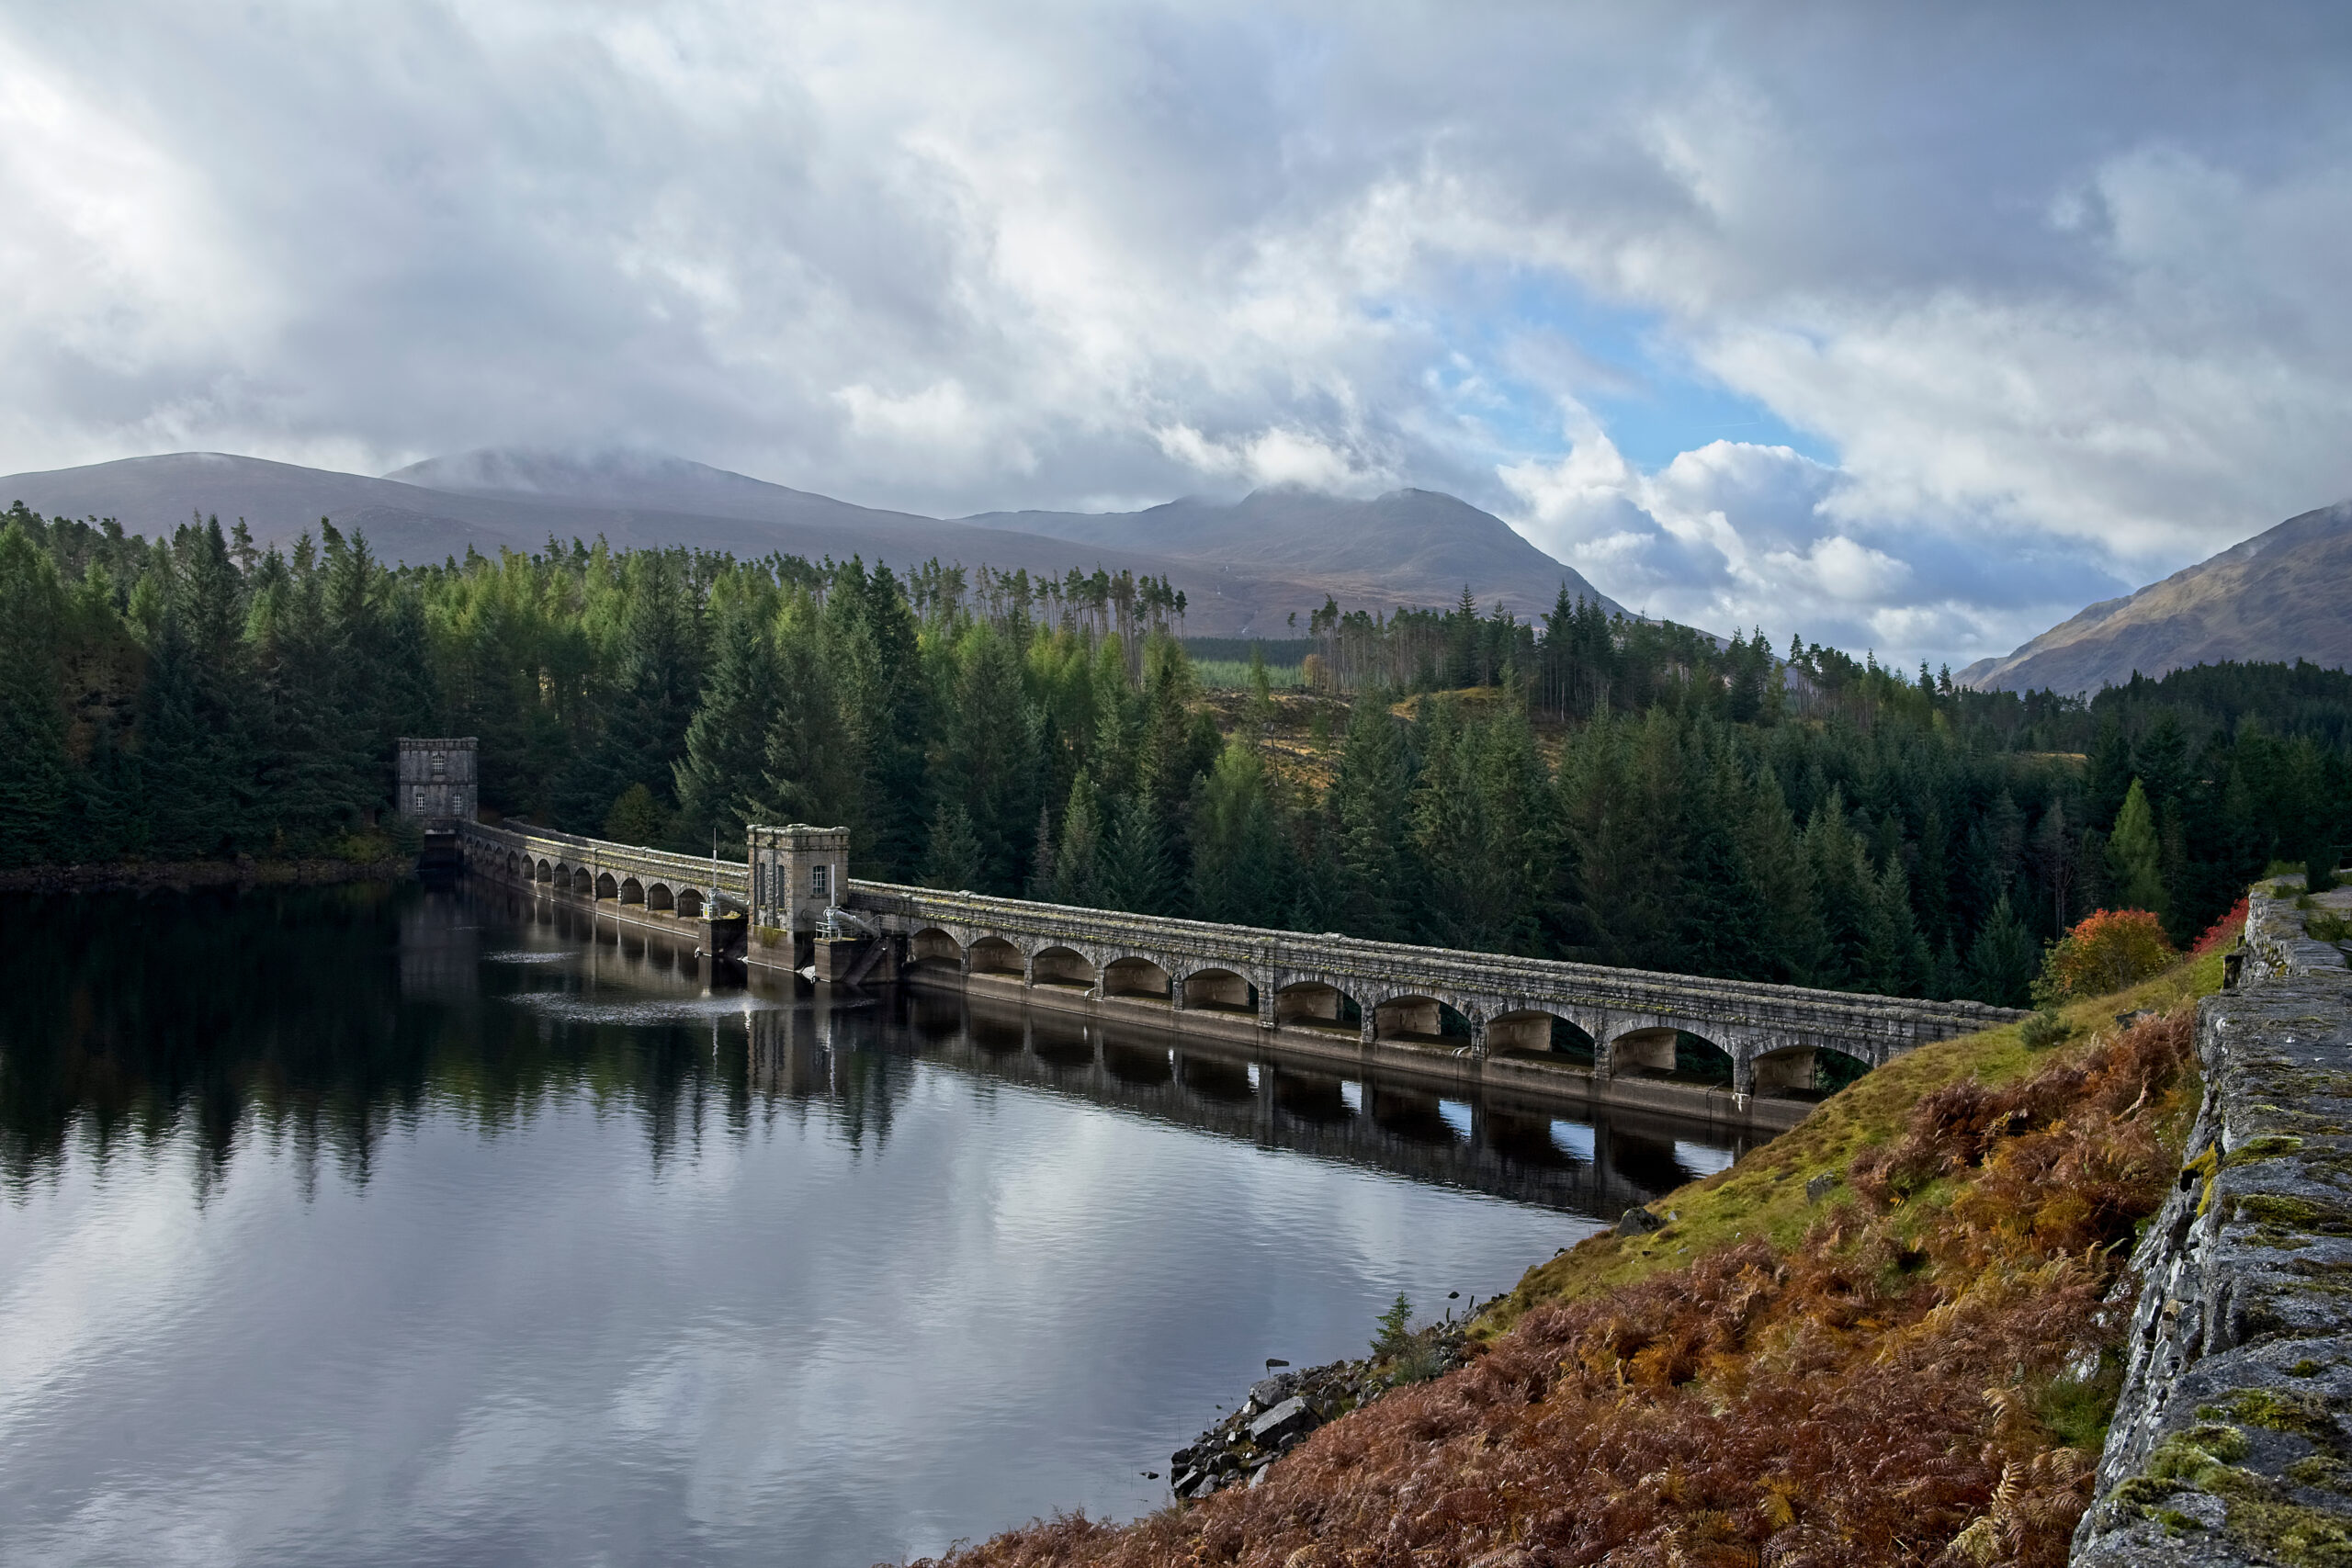 Hydro Electric Dam situated on Loch Laggan in the Highlands of S